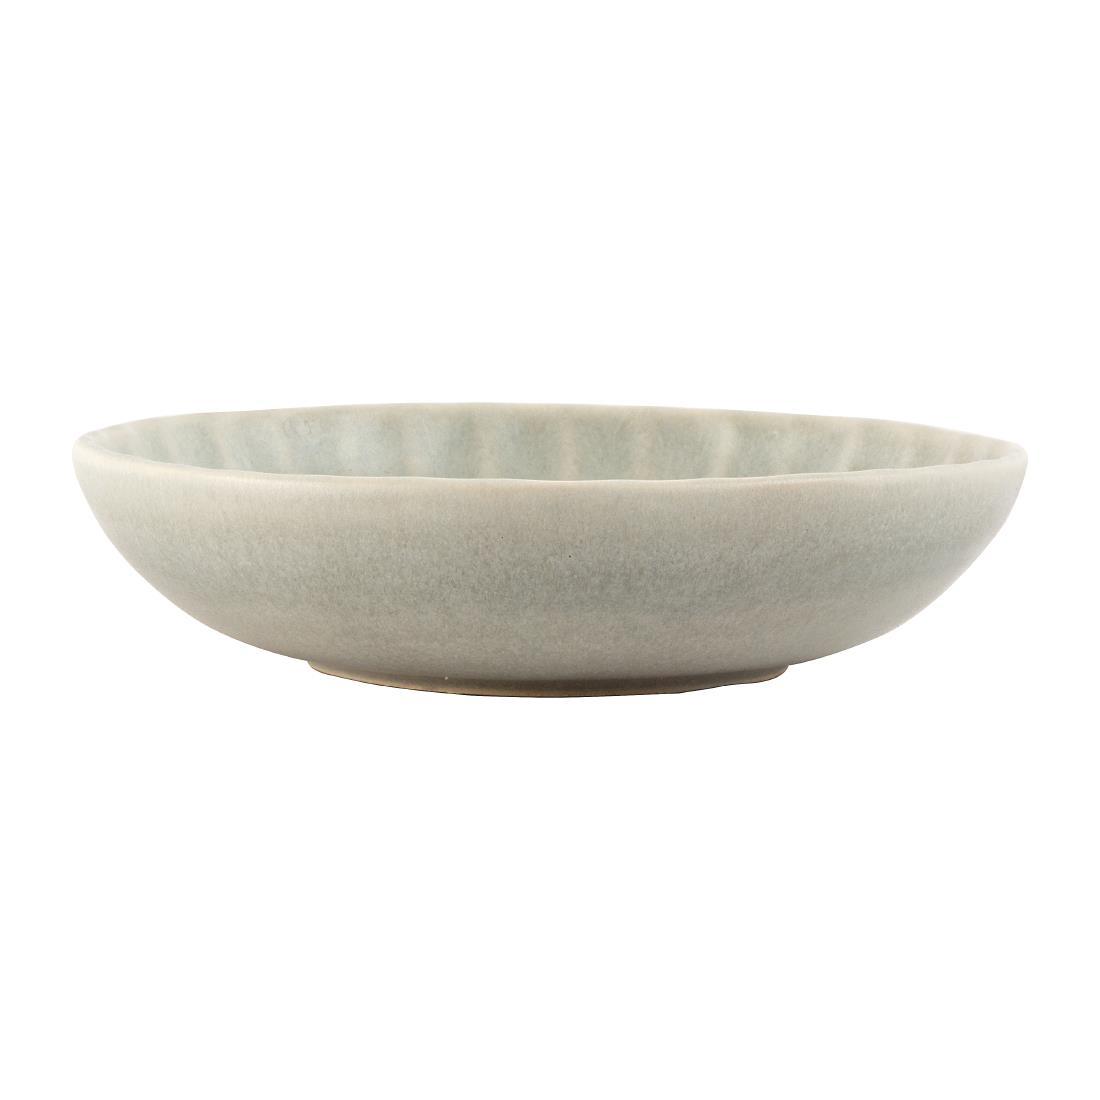 Olympia Corallite Coupe Bowls Concrete Grey 160mm (Pack of 6) - FB959  - 3